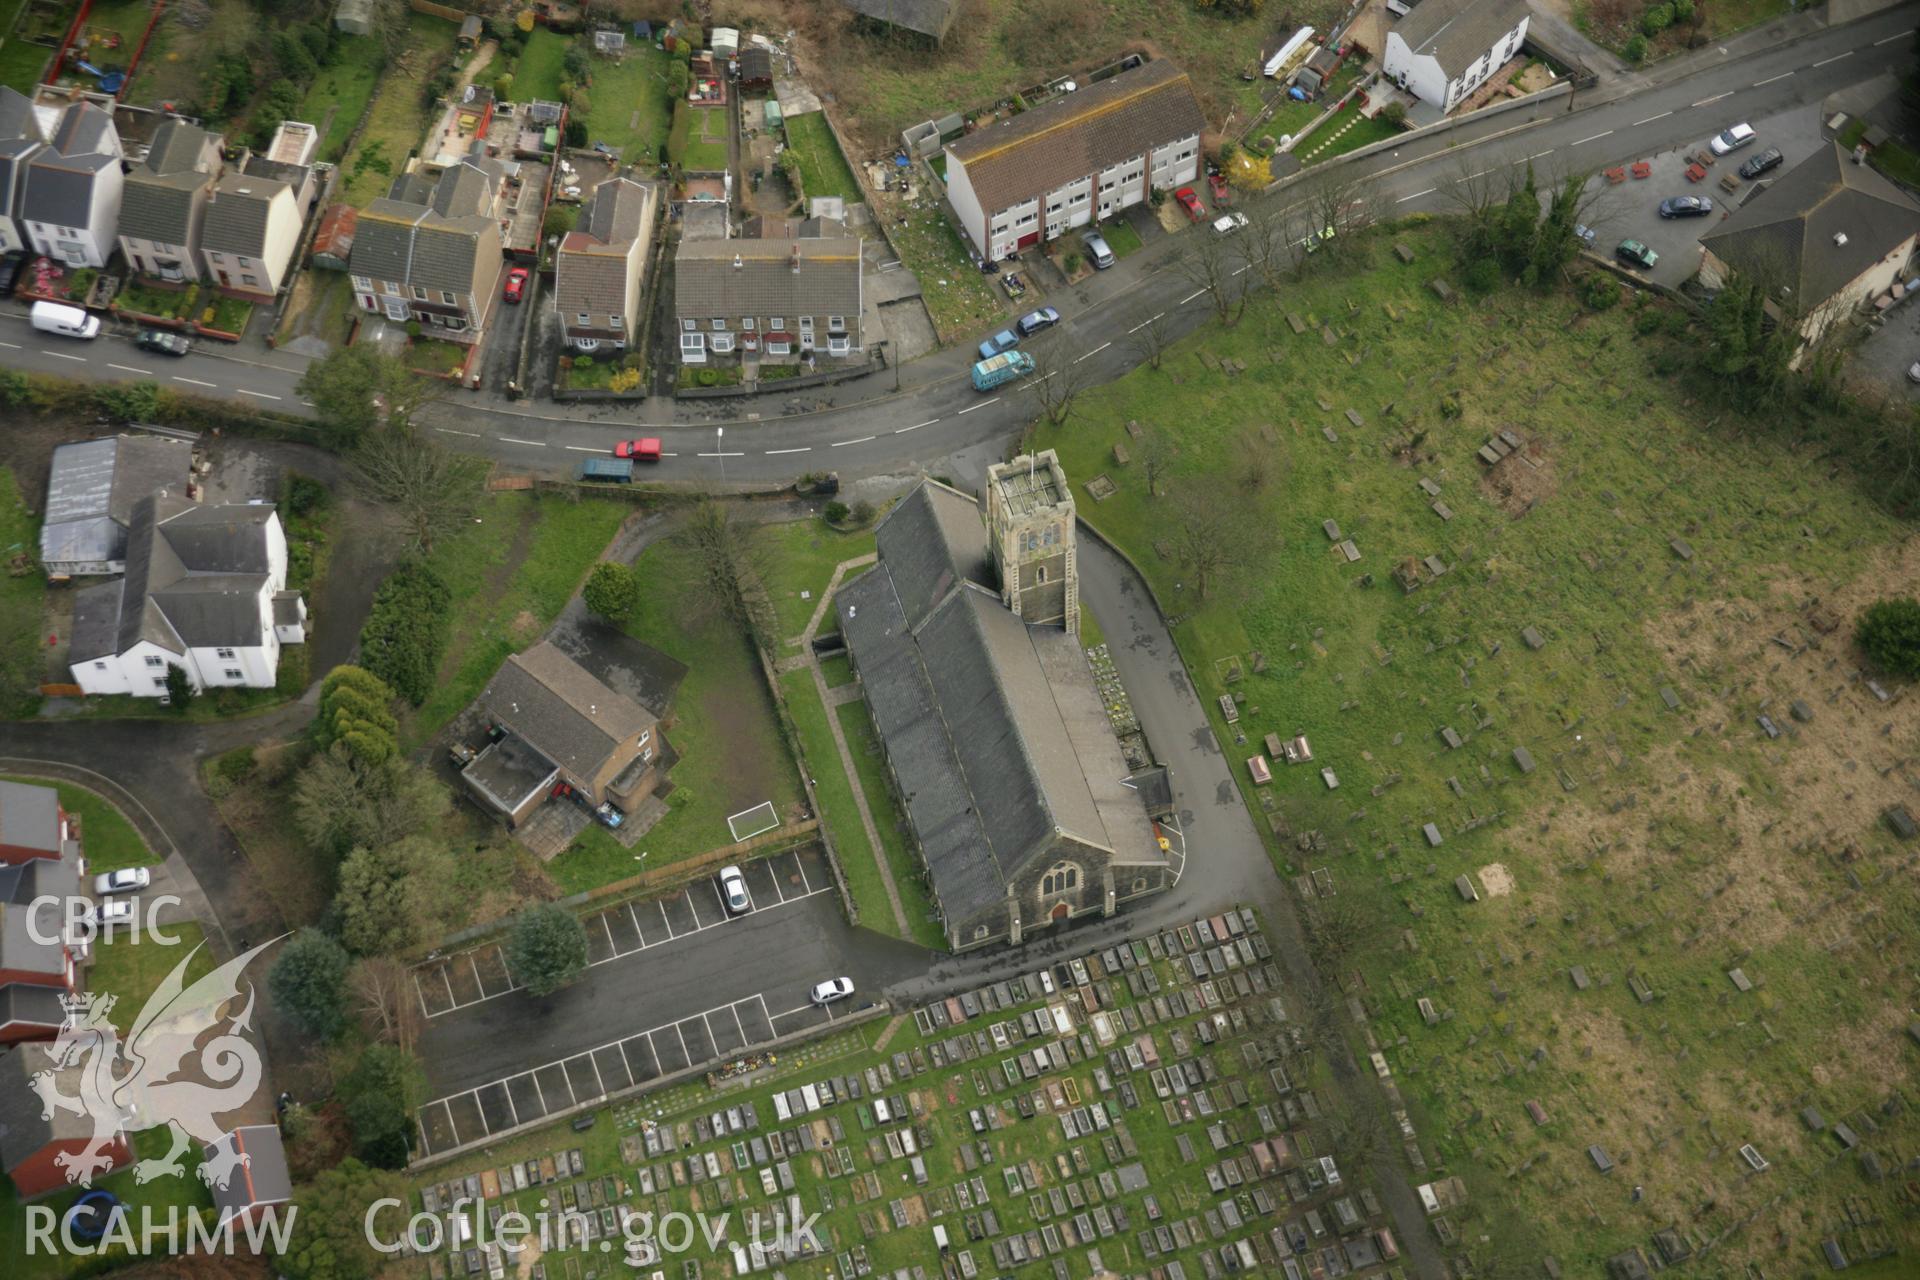 RCAHMW colour oblique aerial photograph of St Samlet's Church, Llansamlet. Taken on 16 March 2007 by Toby Driver